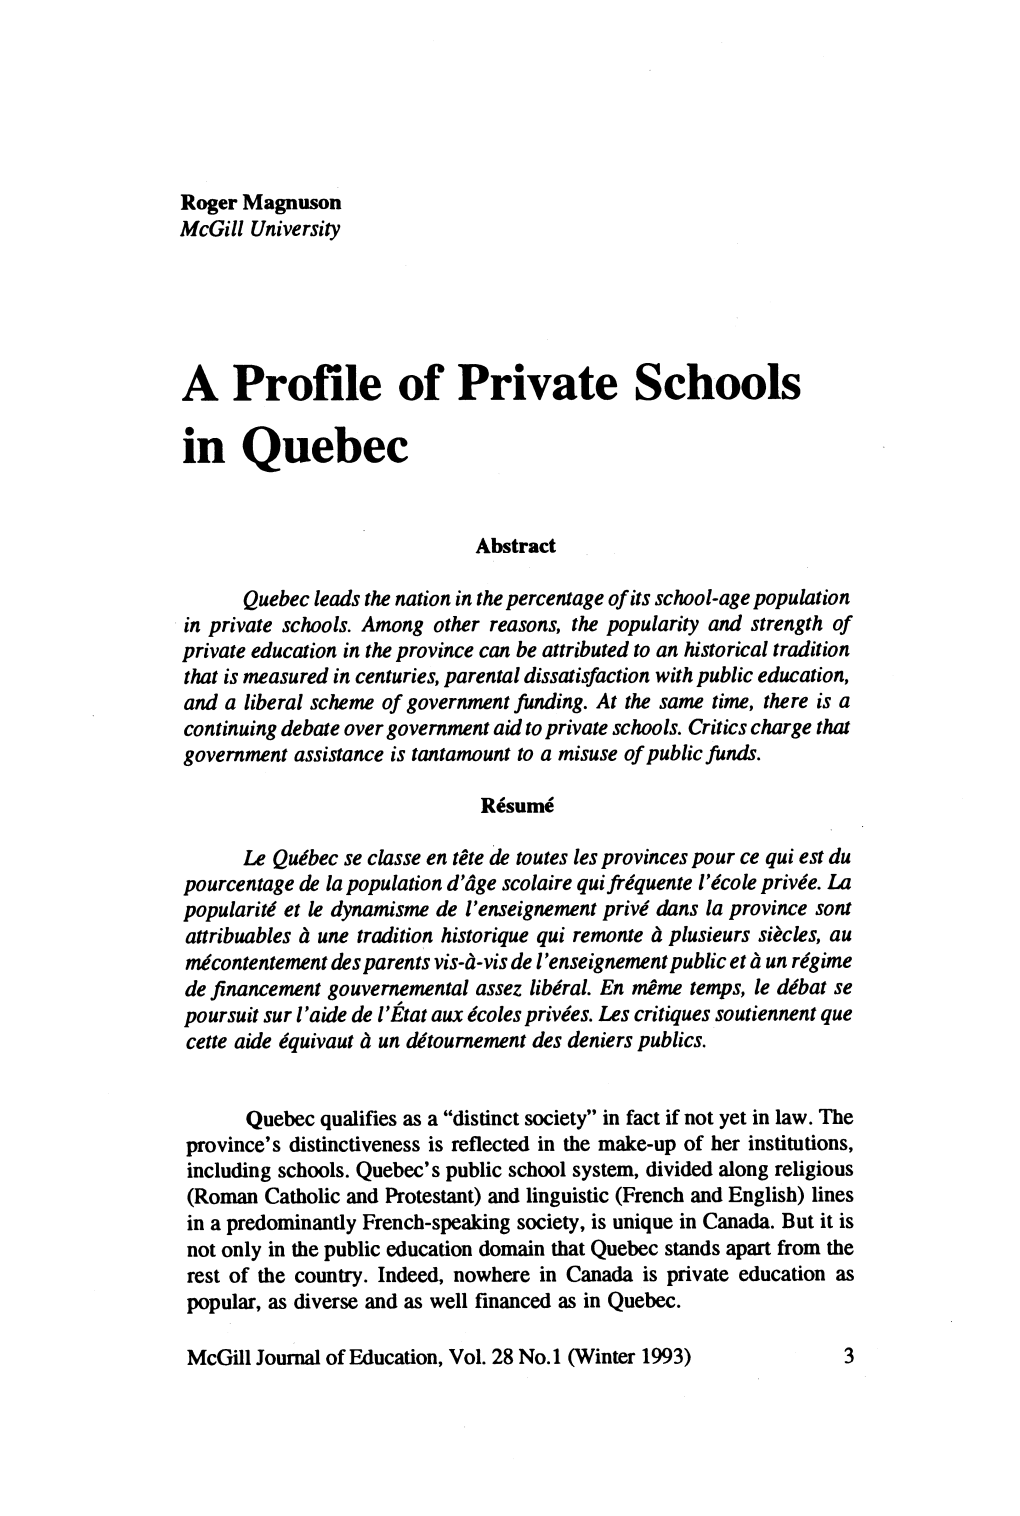 A Profile of Private Schools in Quebec